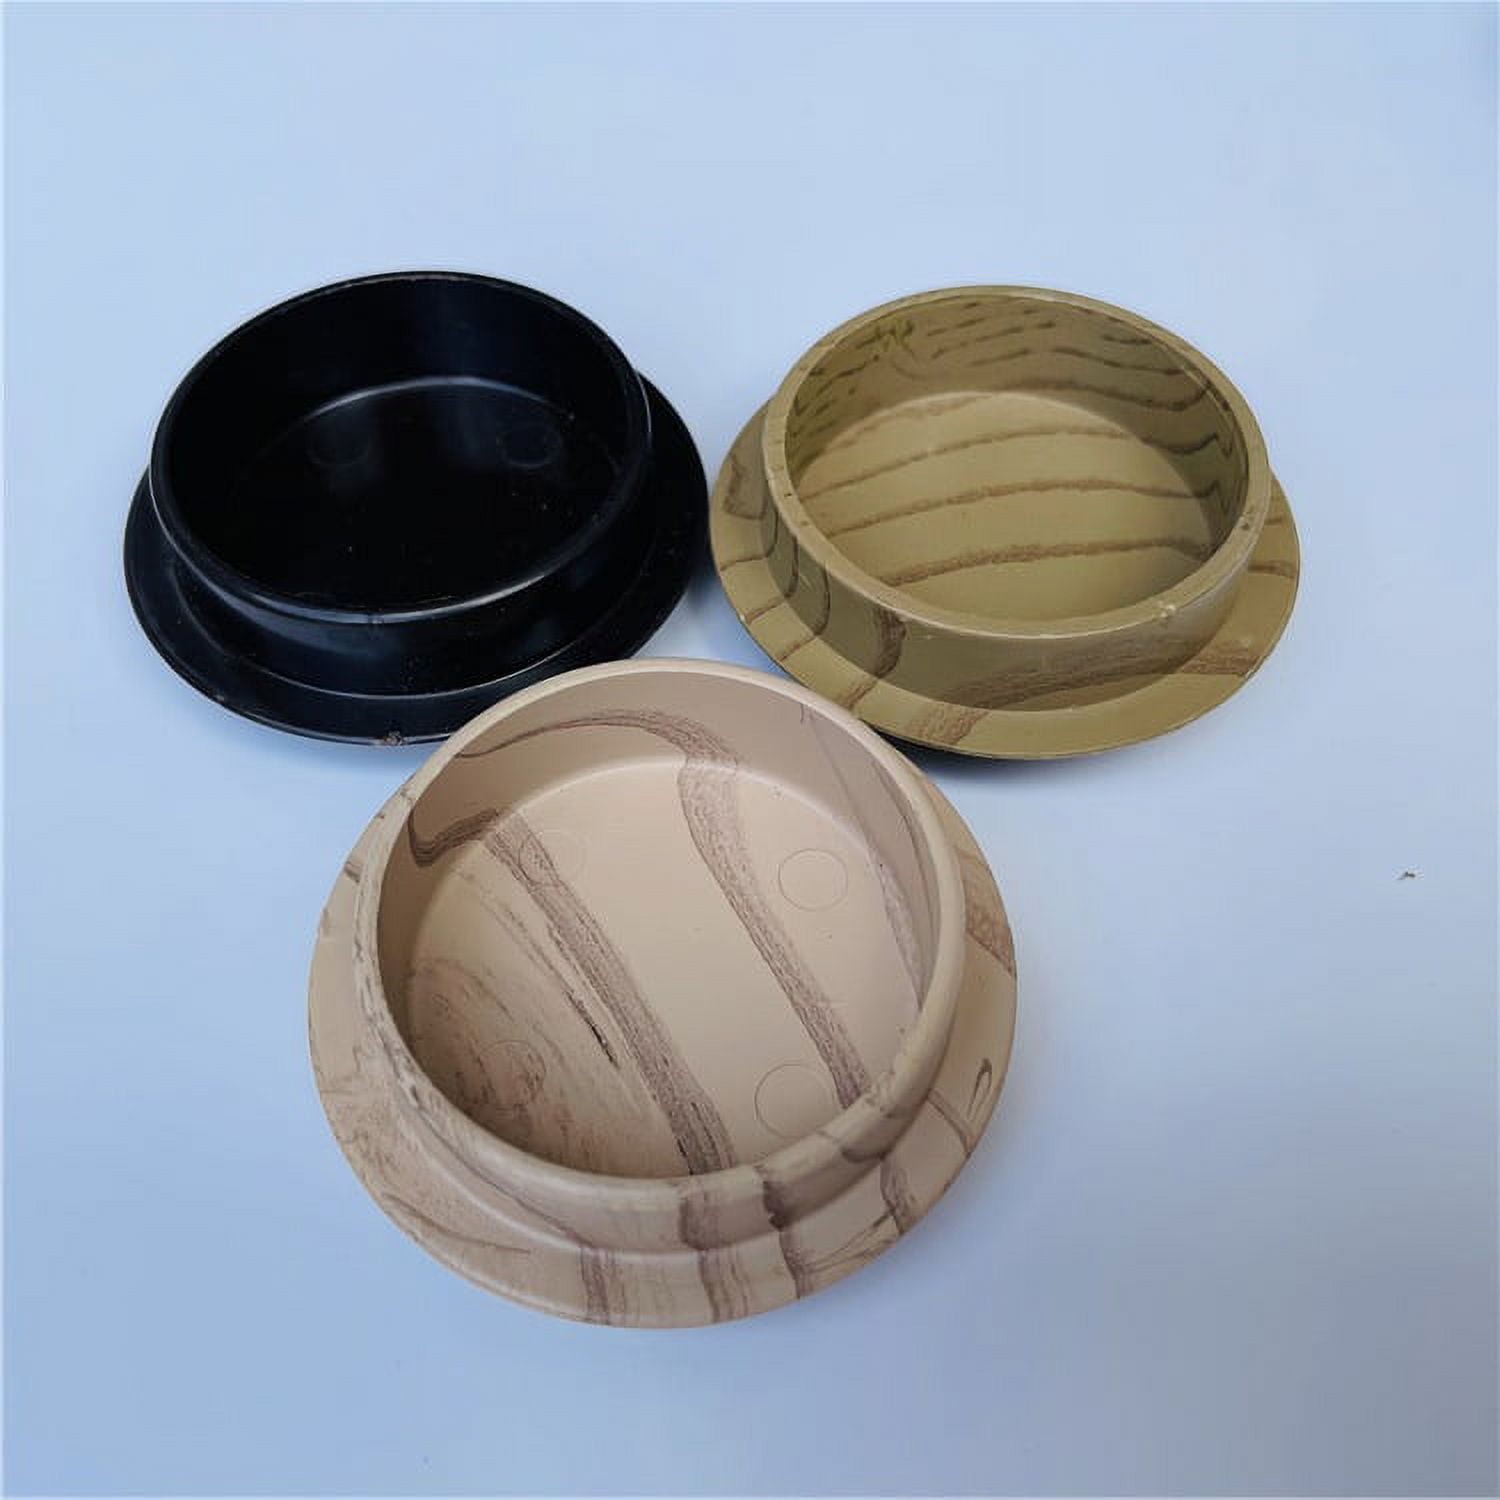 Buy 5Pcs Wheel Stoppers for Rolling Furniture Feet Floor Protectors  Furniture Coasters Online